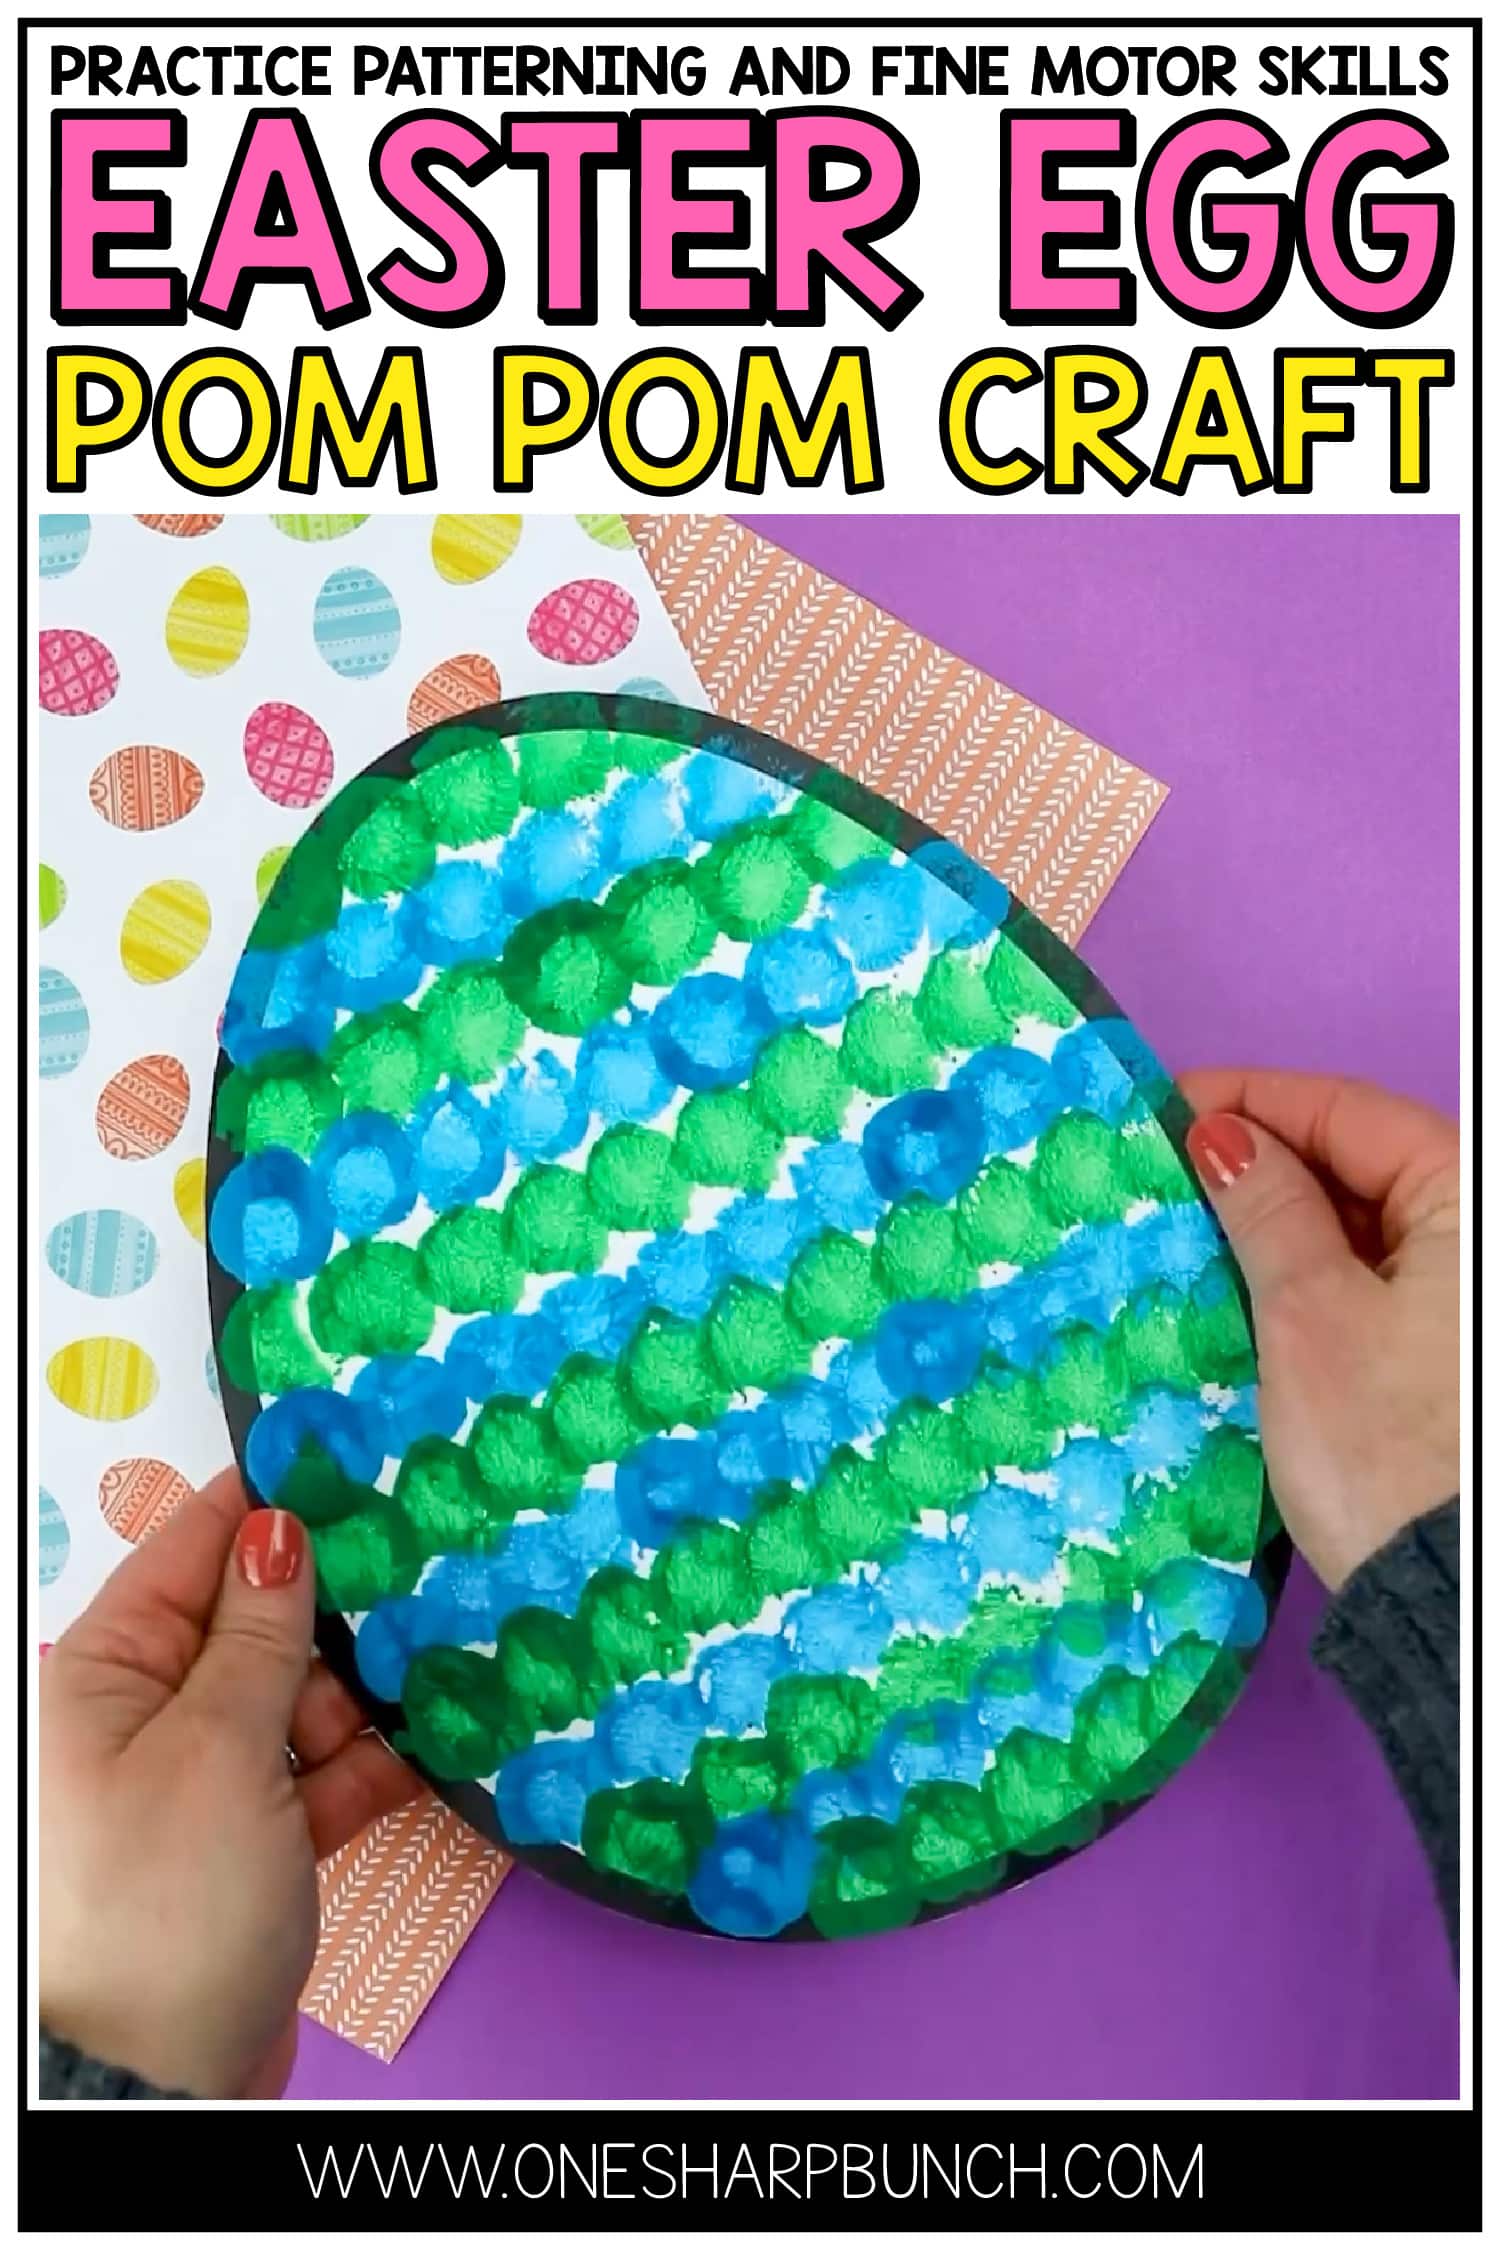 Celebrate spring with these bright and colorful eggs! Invite your preschool and kindergarten students to practice making patterns with this pom pom painted Easter egg craft. Not only is this colorful egg craft perfect for creating patterns, it is also perfect for building fine motor skills! It’s one of the best spring crafts for kids, especially since each one turns out beautifully unique! #finemotorskills #kindergarten #preschool #craftsforkids #kidscrafts #teacher #springcrafts #easter